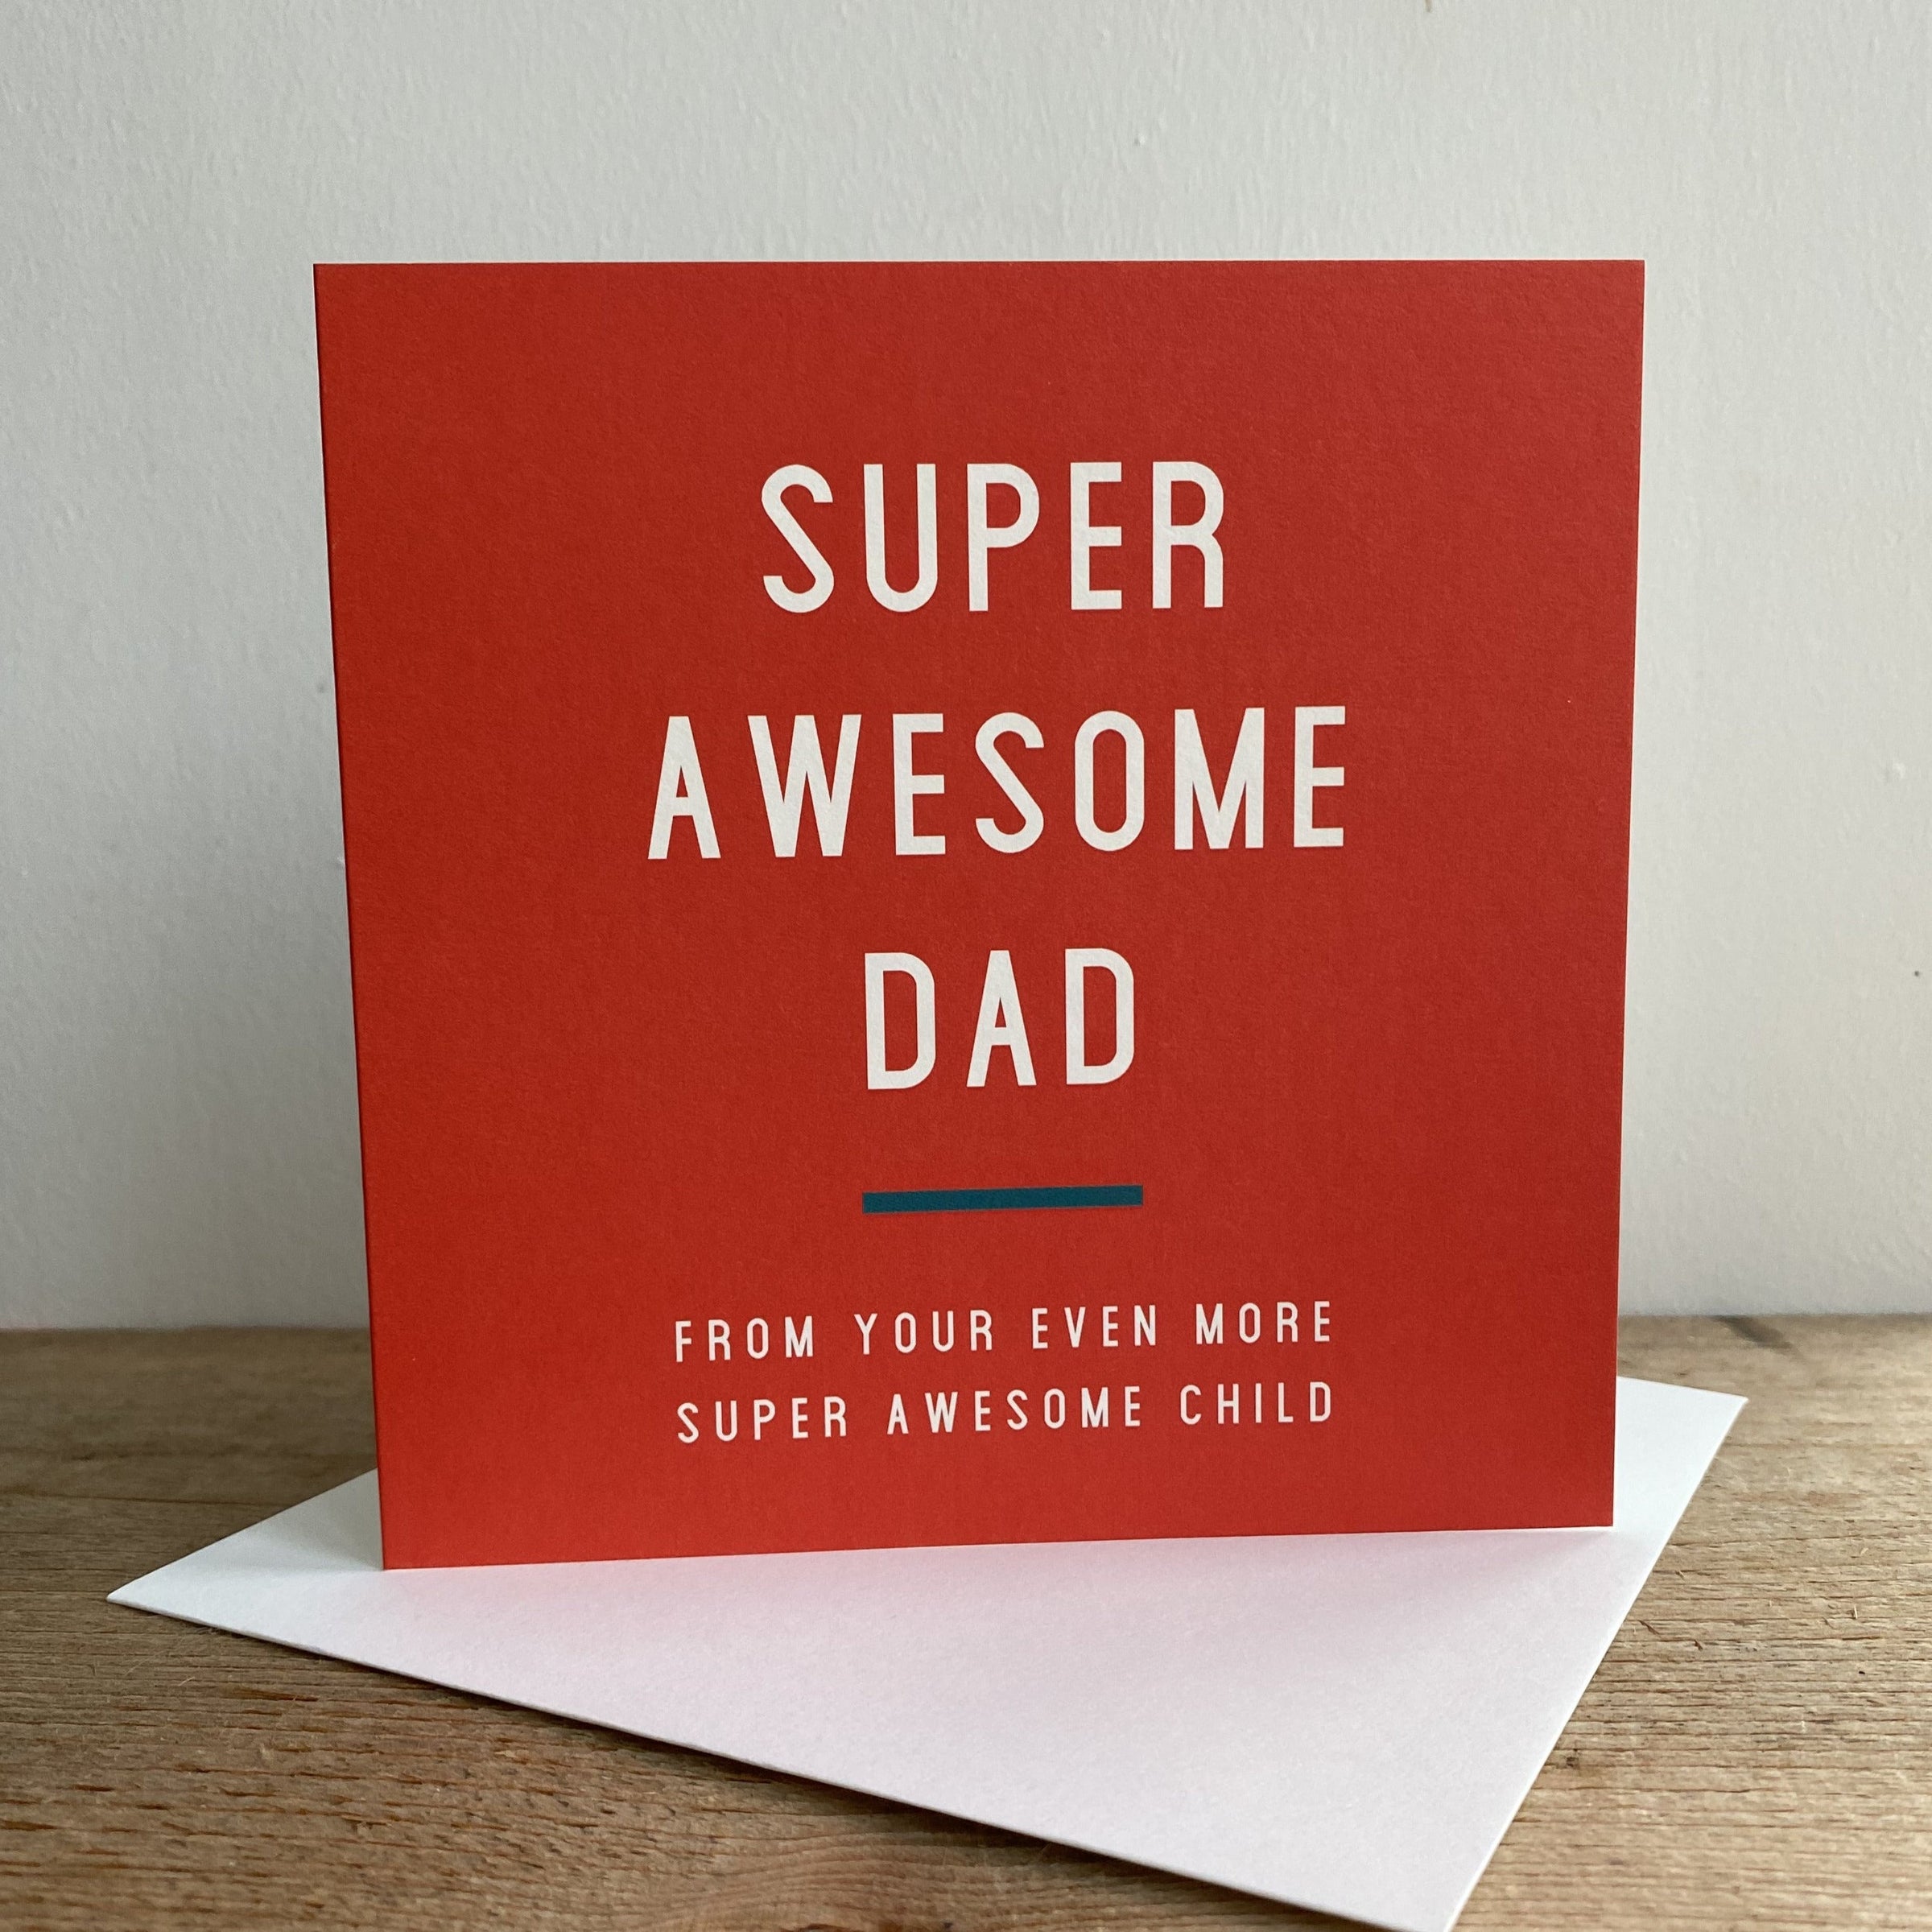 Super Awesome Dad